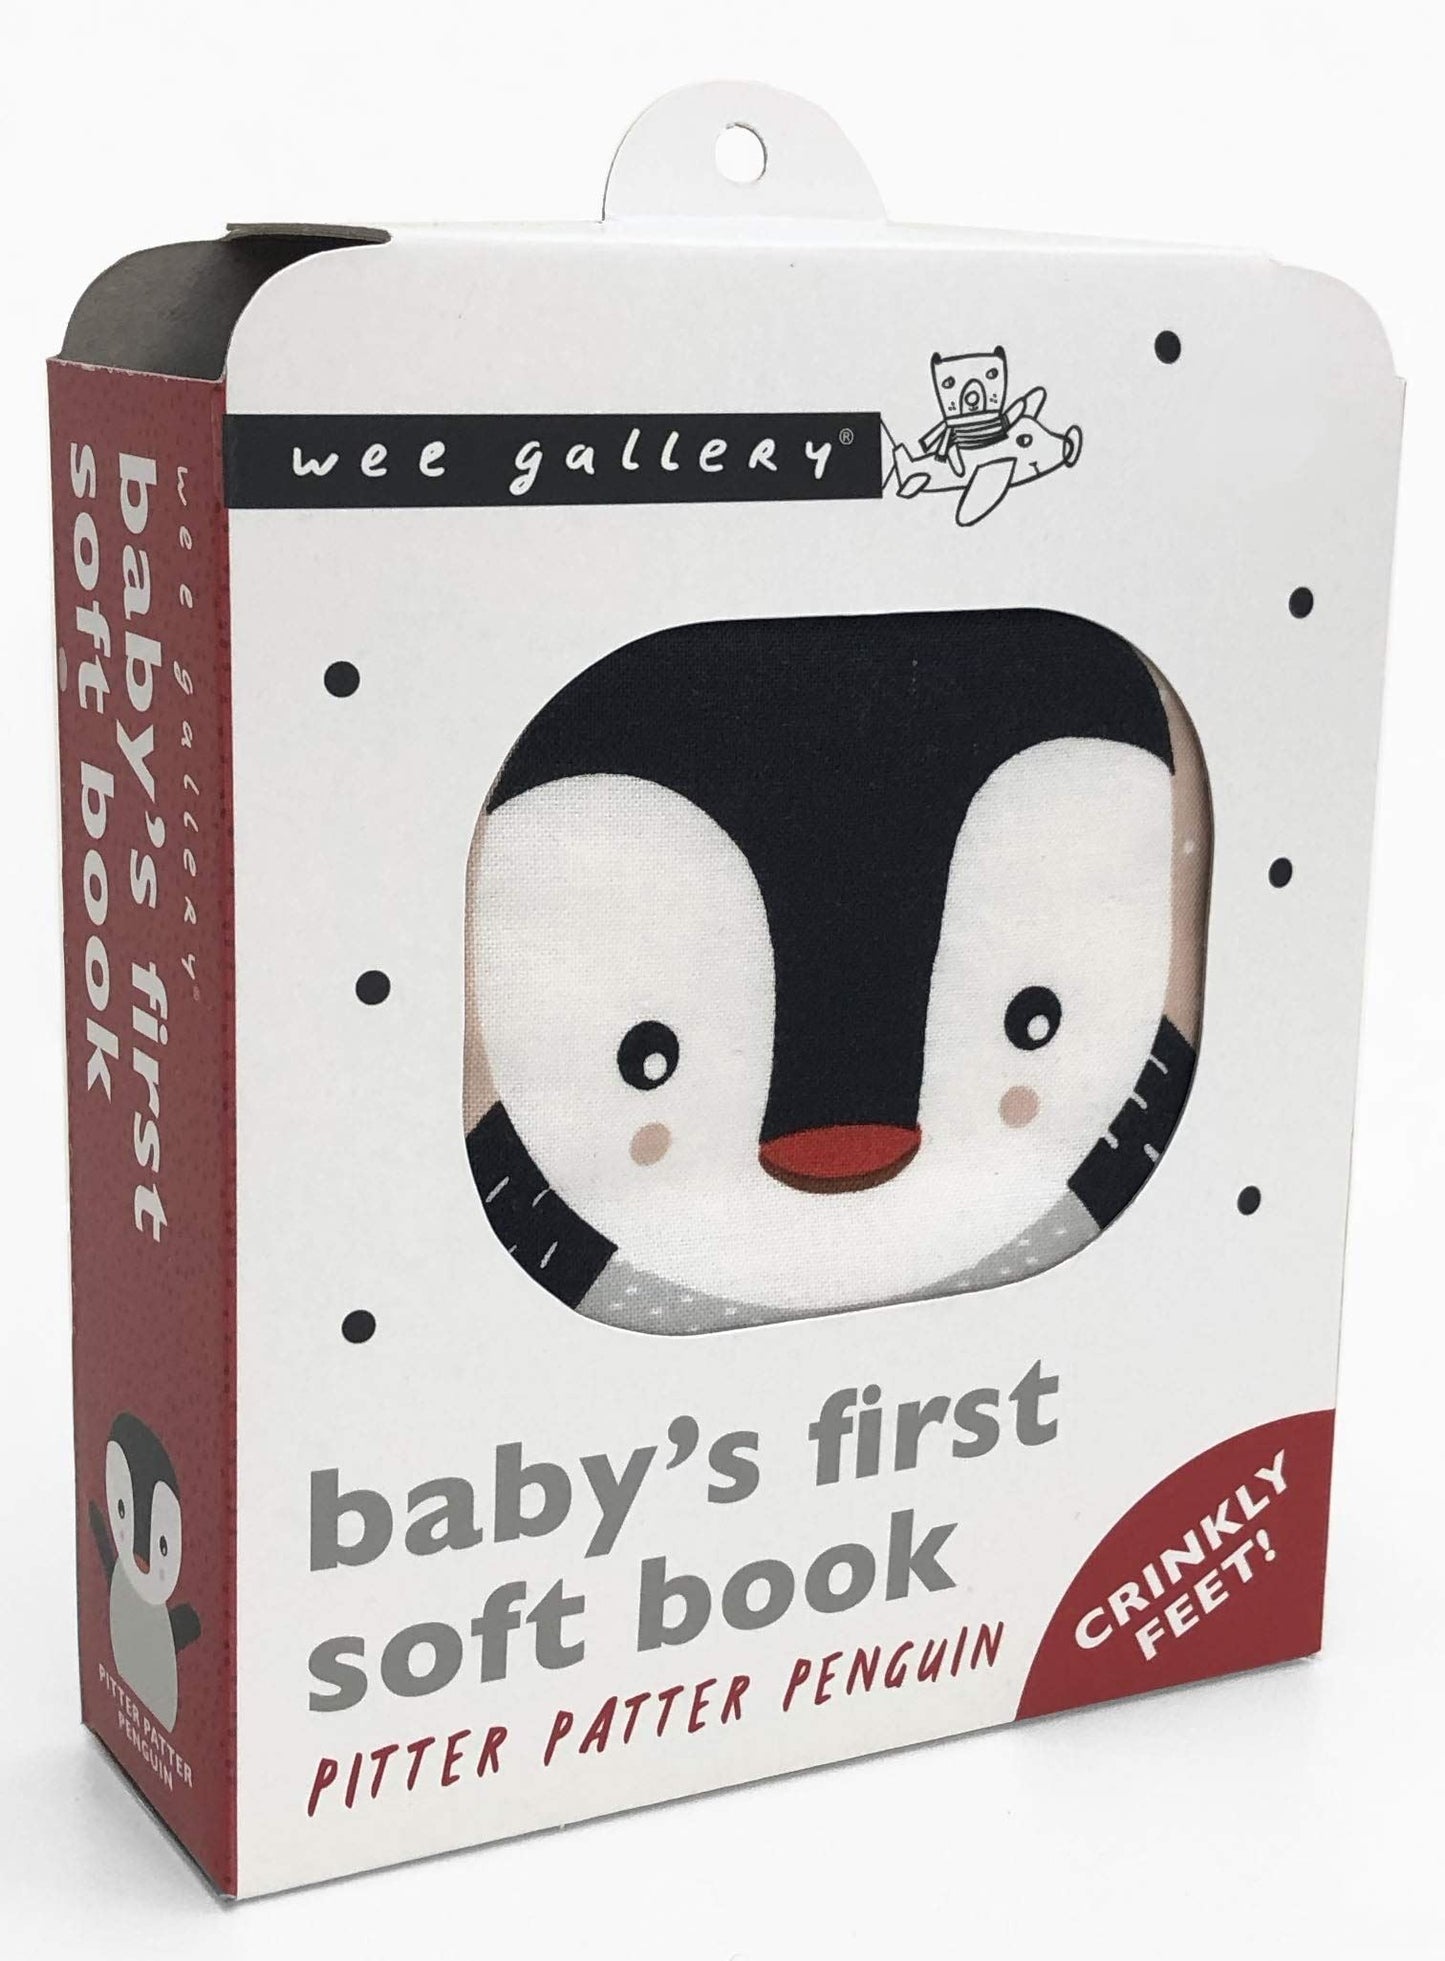 Pitter Patter Penguin Baby’s First Soft Book